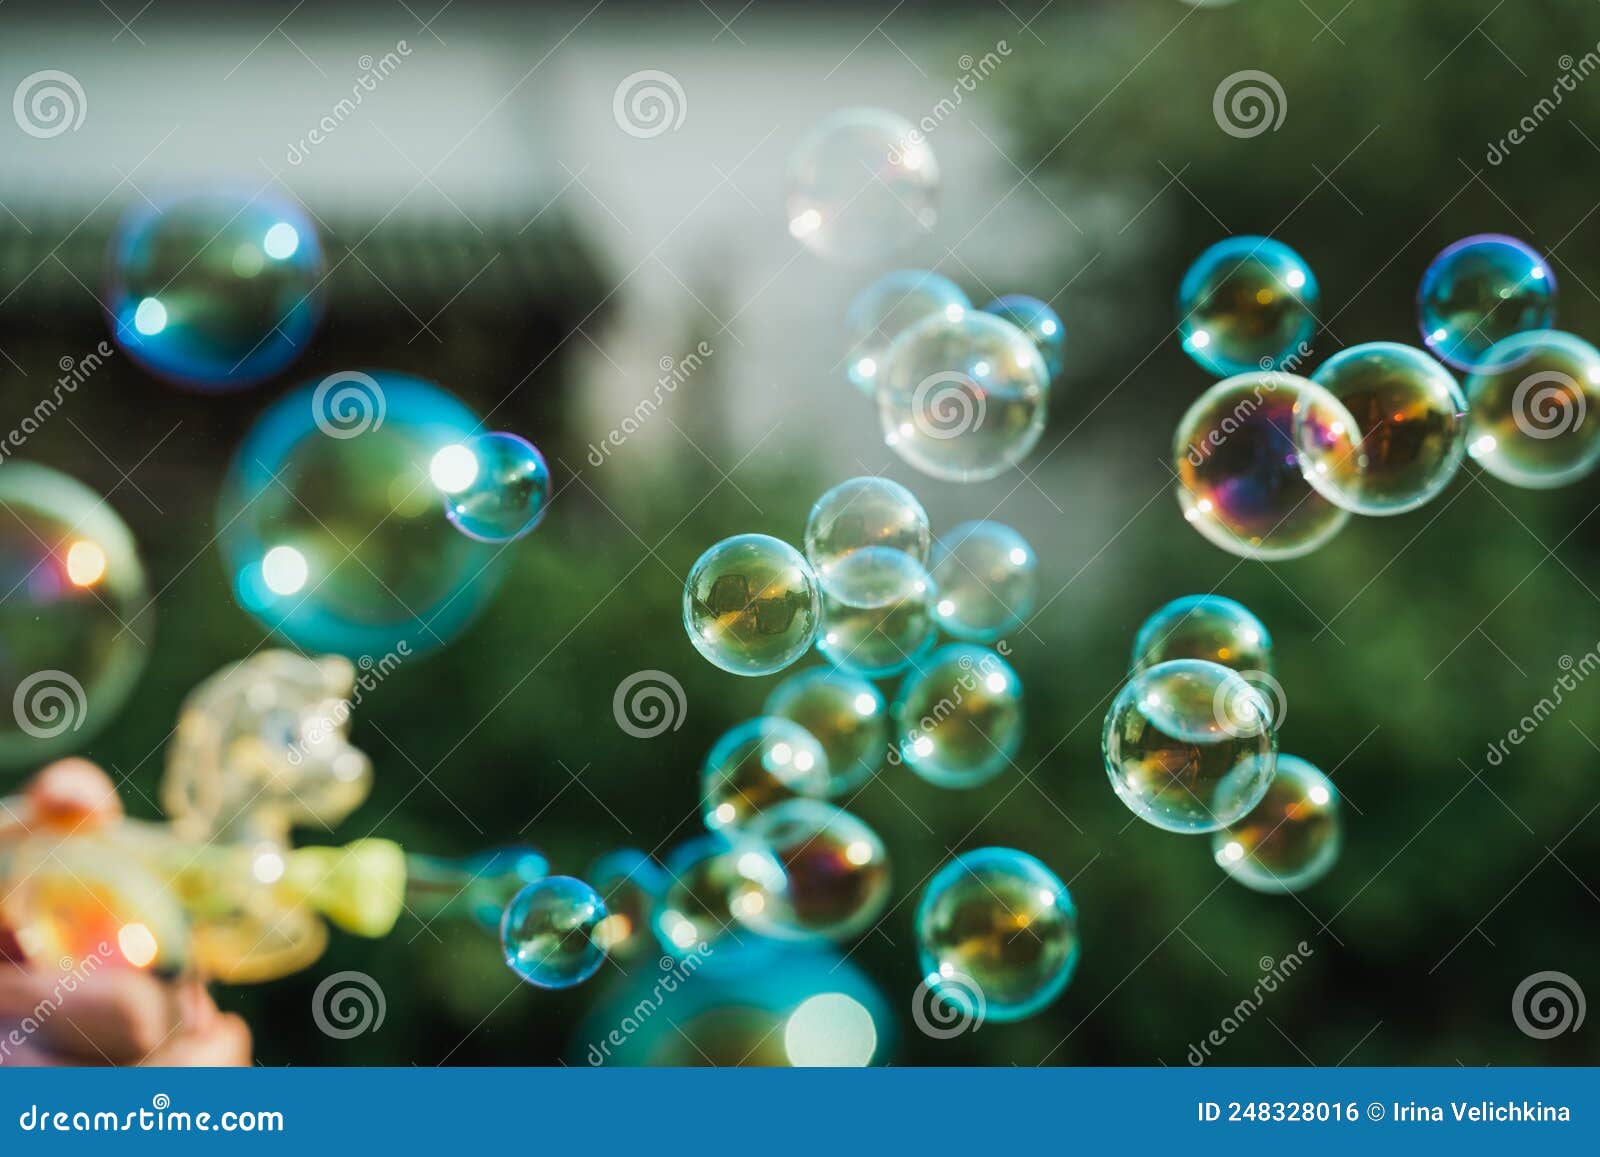 337 Bubble Shooter Royalty-Free Images, Stock Photos & Pictures